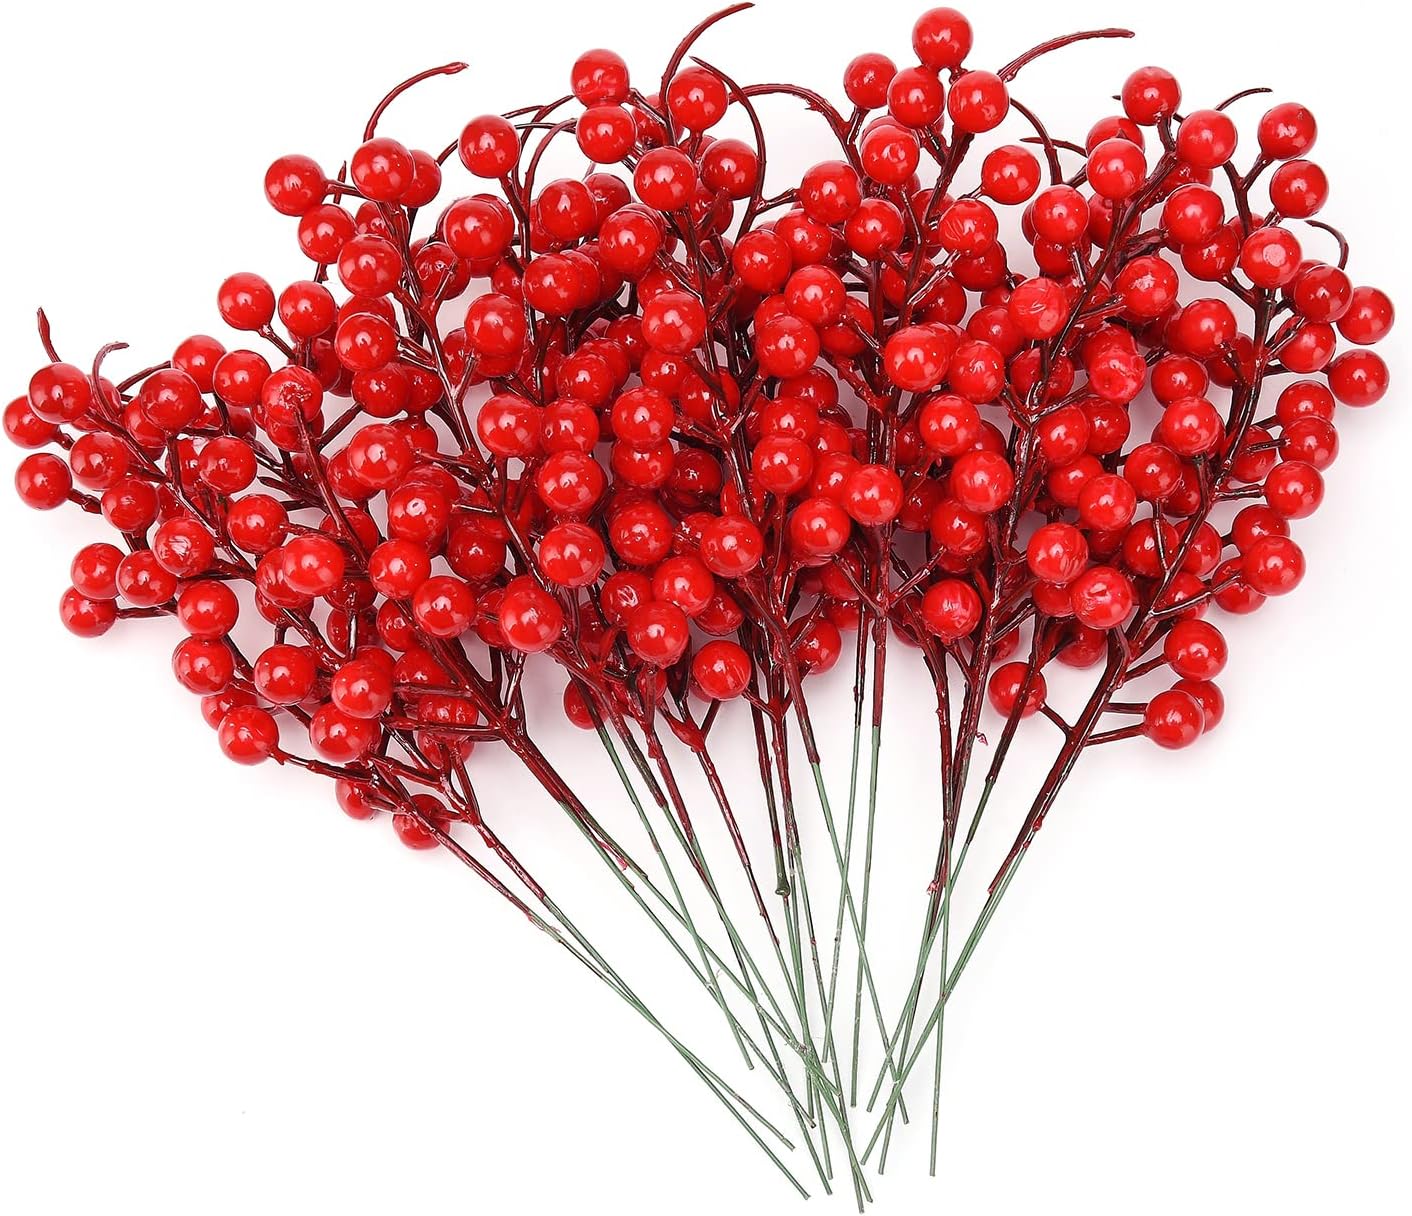 Trianu 20 Pcs Artificial Red Berry Stems Christmas Red Berries Holly Berry  Branches 8.26 inch Fake Burgundy Berry Picks for Floral Arrangements